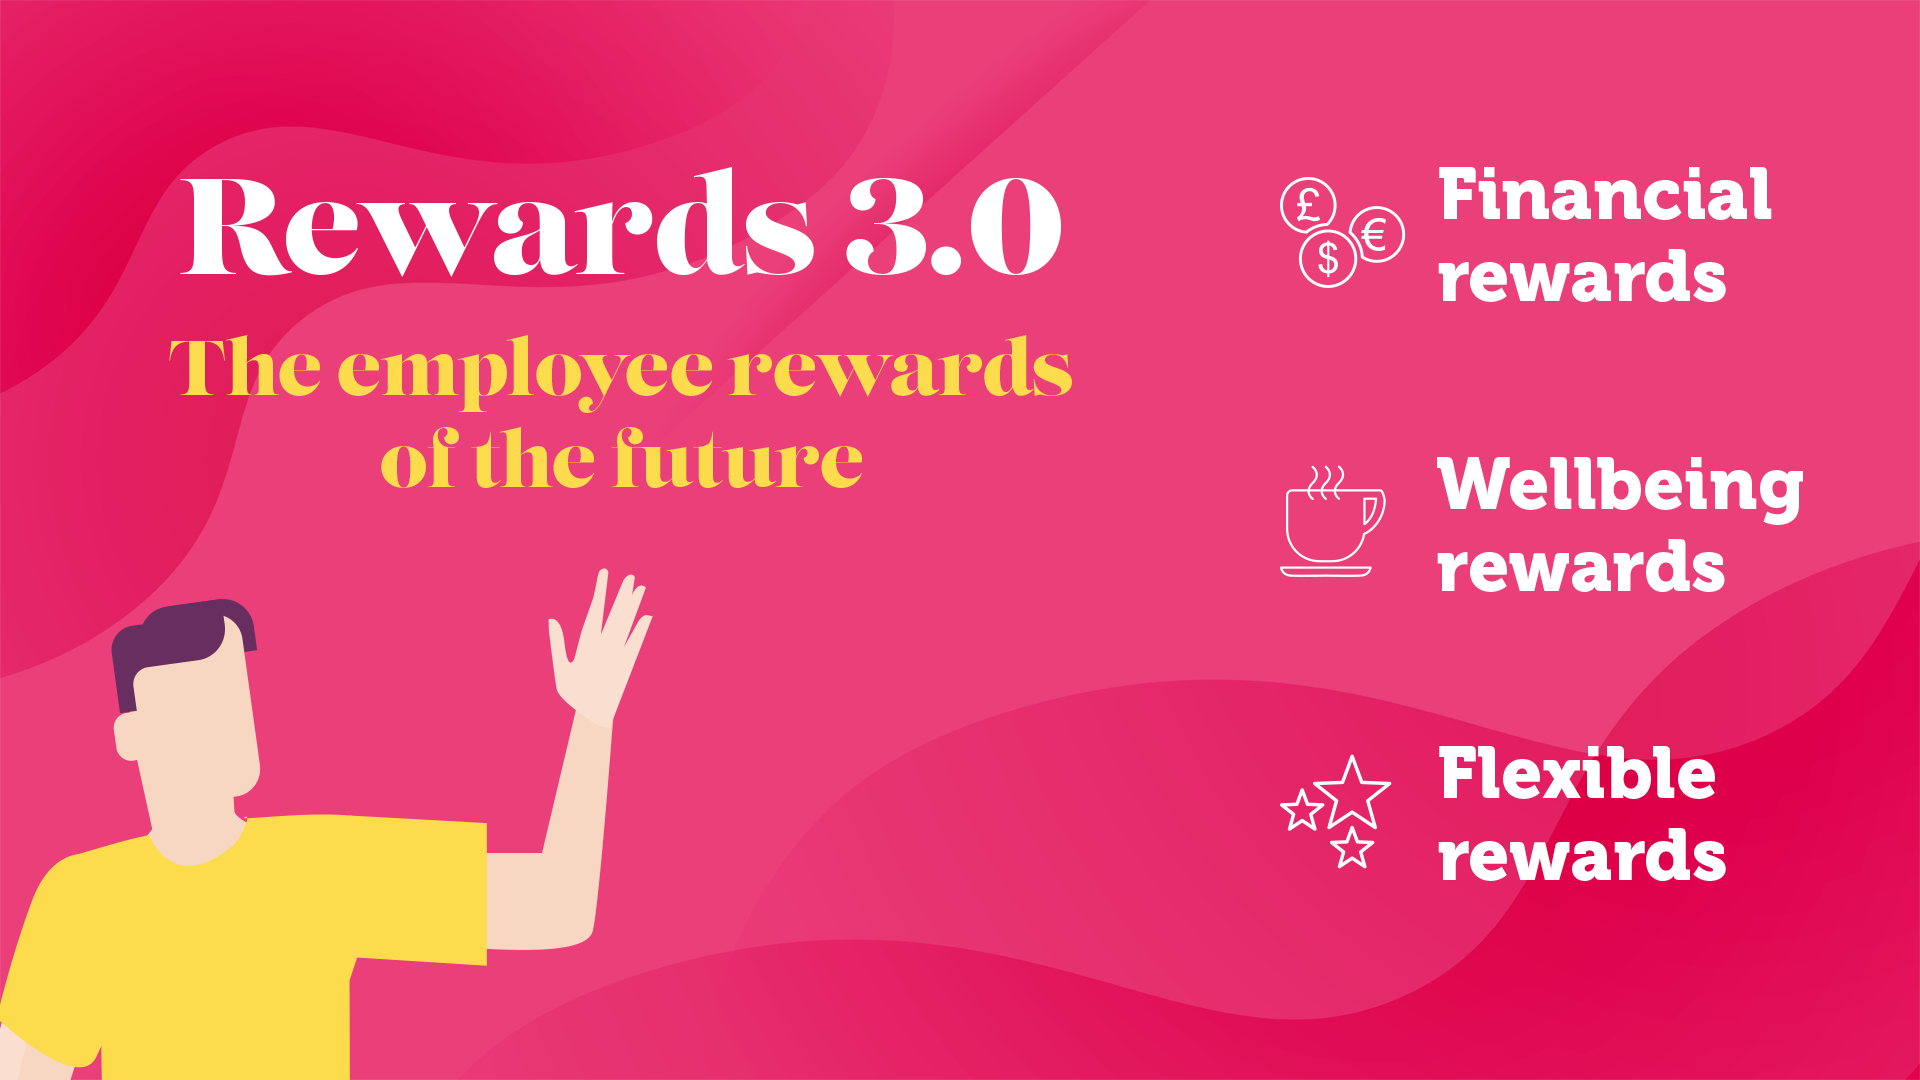 Rewards 3.0 - The employee rewards of the future - Download our explainer